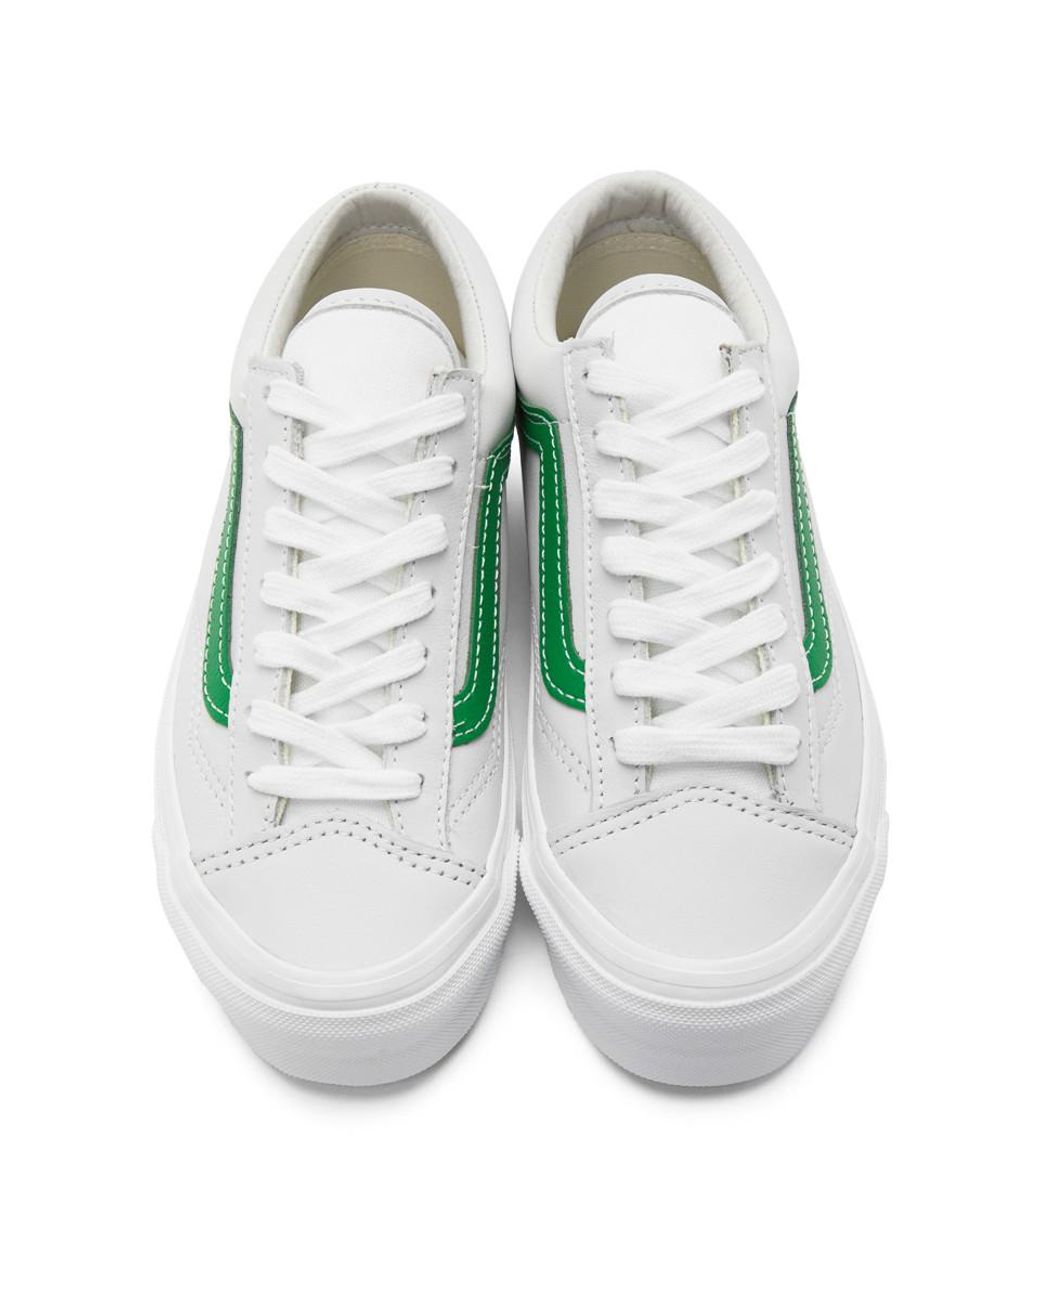 Vans Leather Grey And Green Og Style 36 